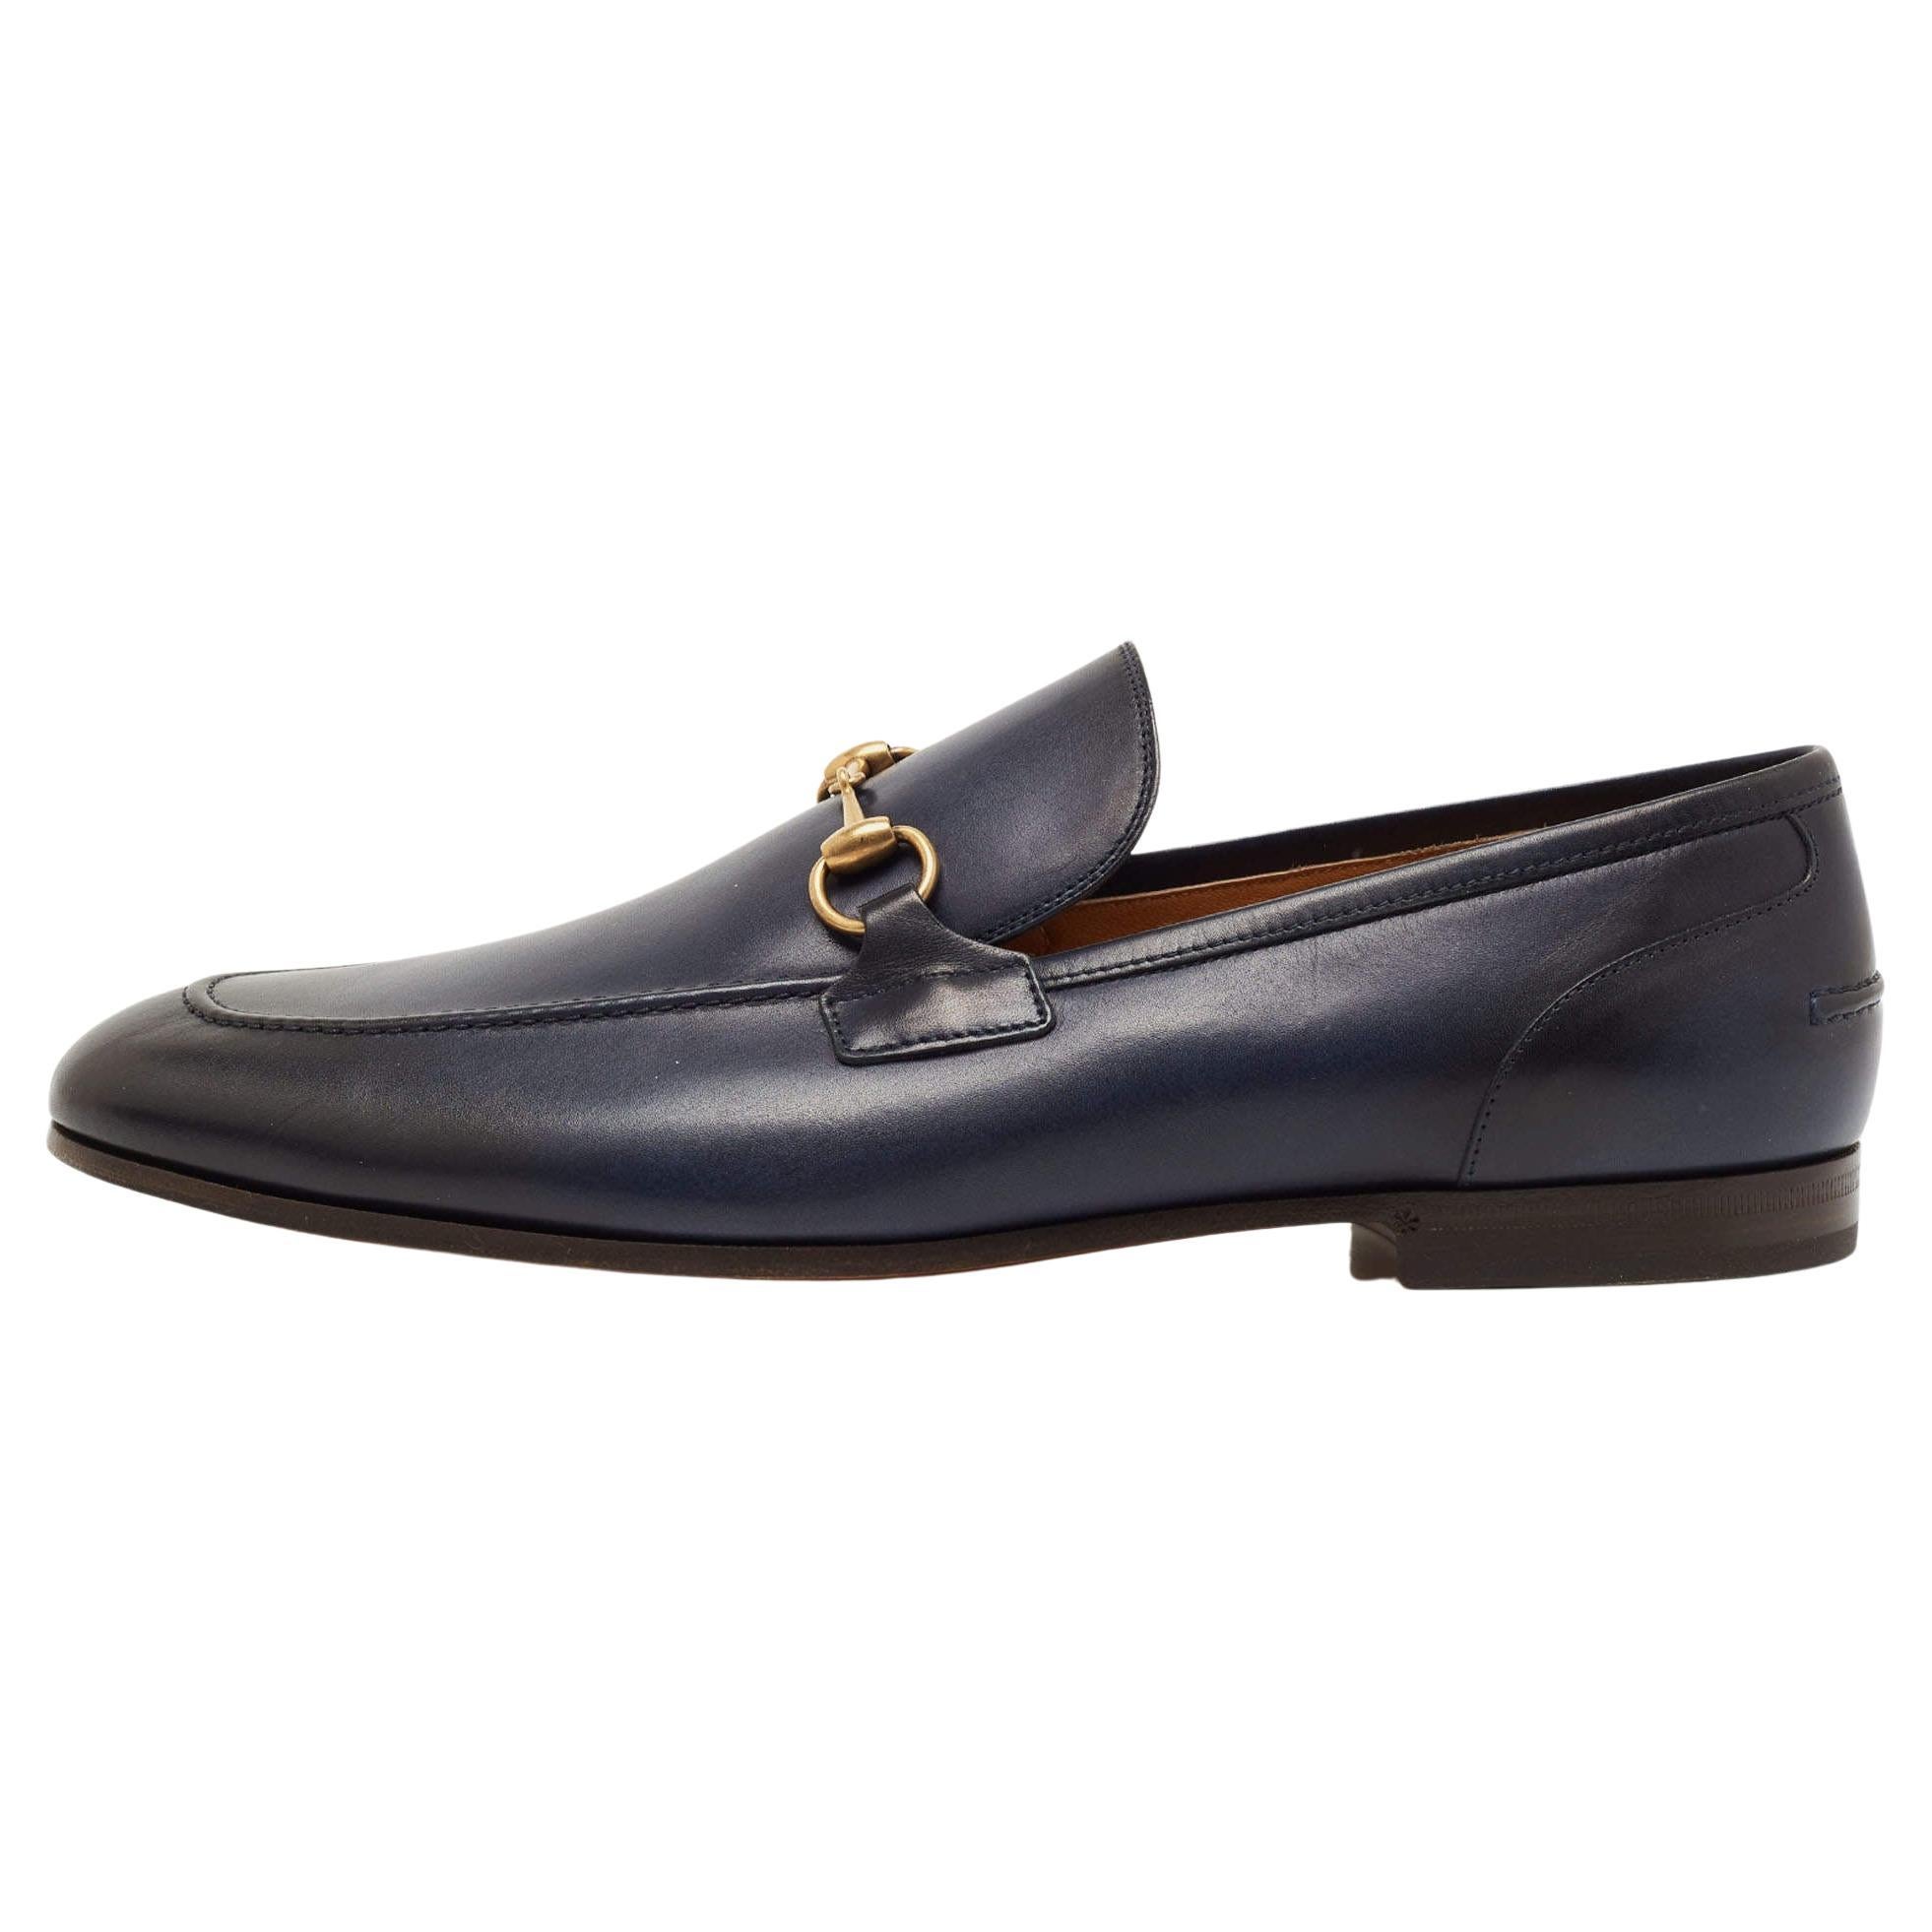 Gucci Navy Blue/Black Leather Jordaan Loafers Size 47